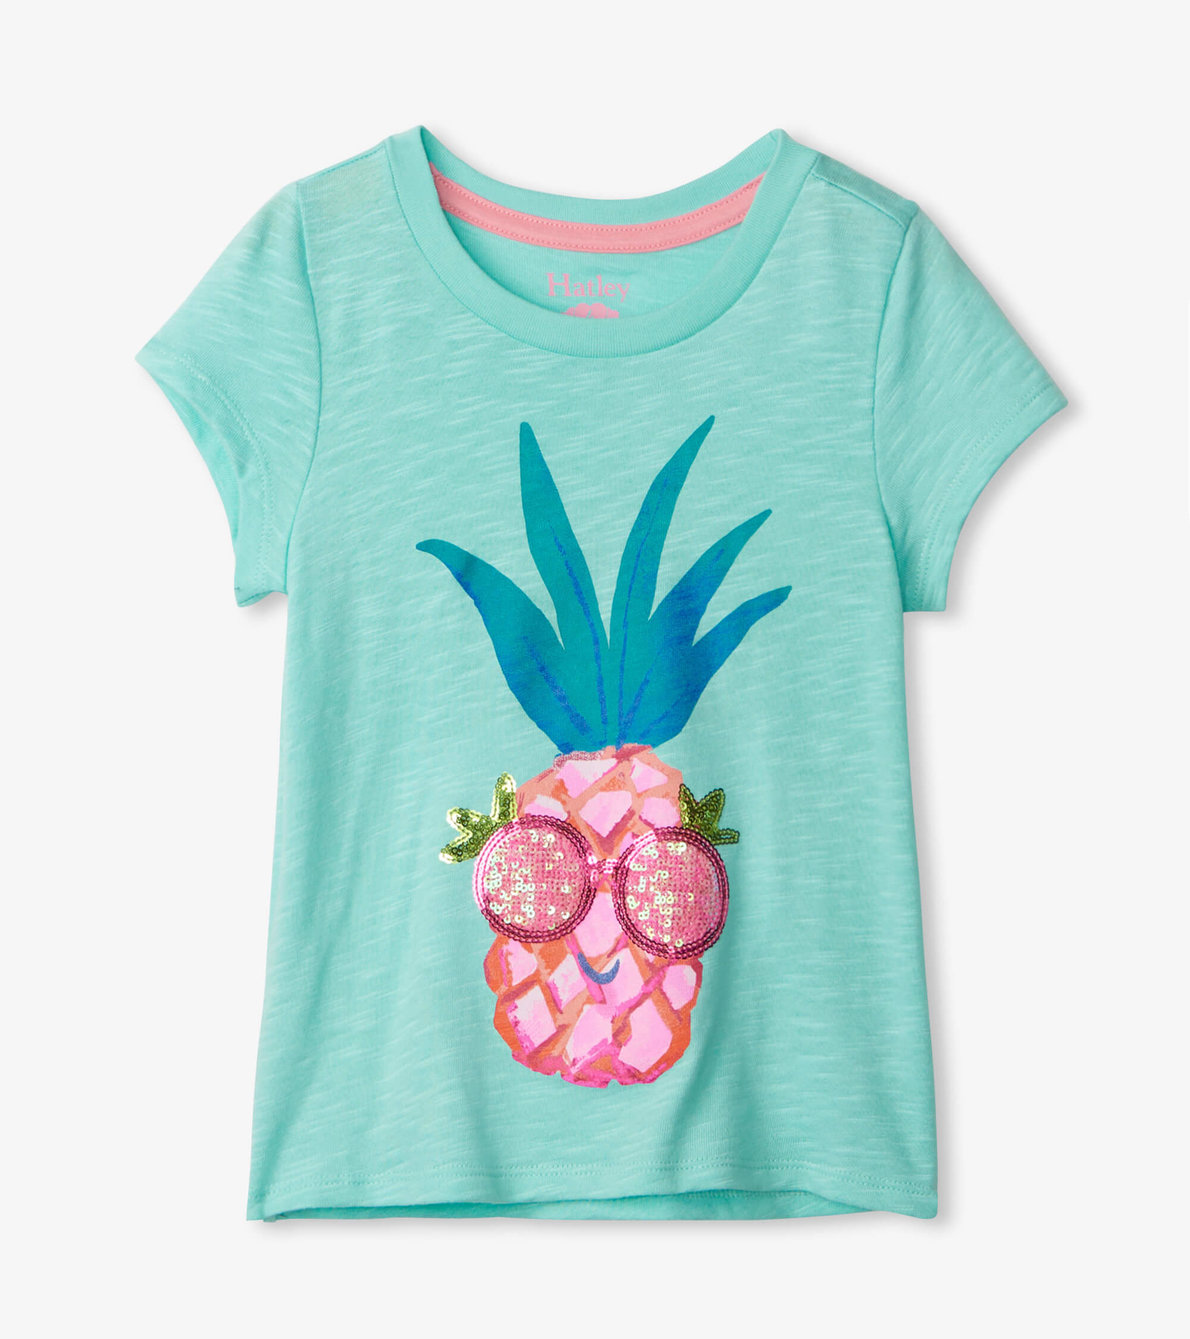 View larger image of Party Pineapple Graphic Tee